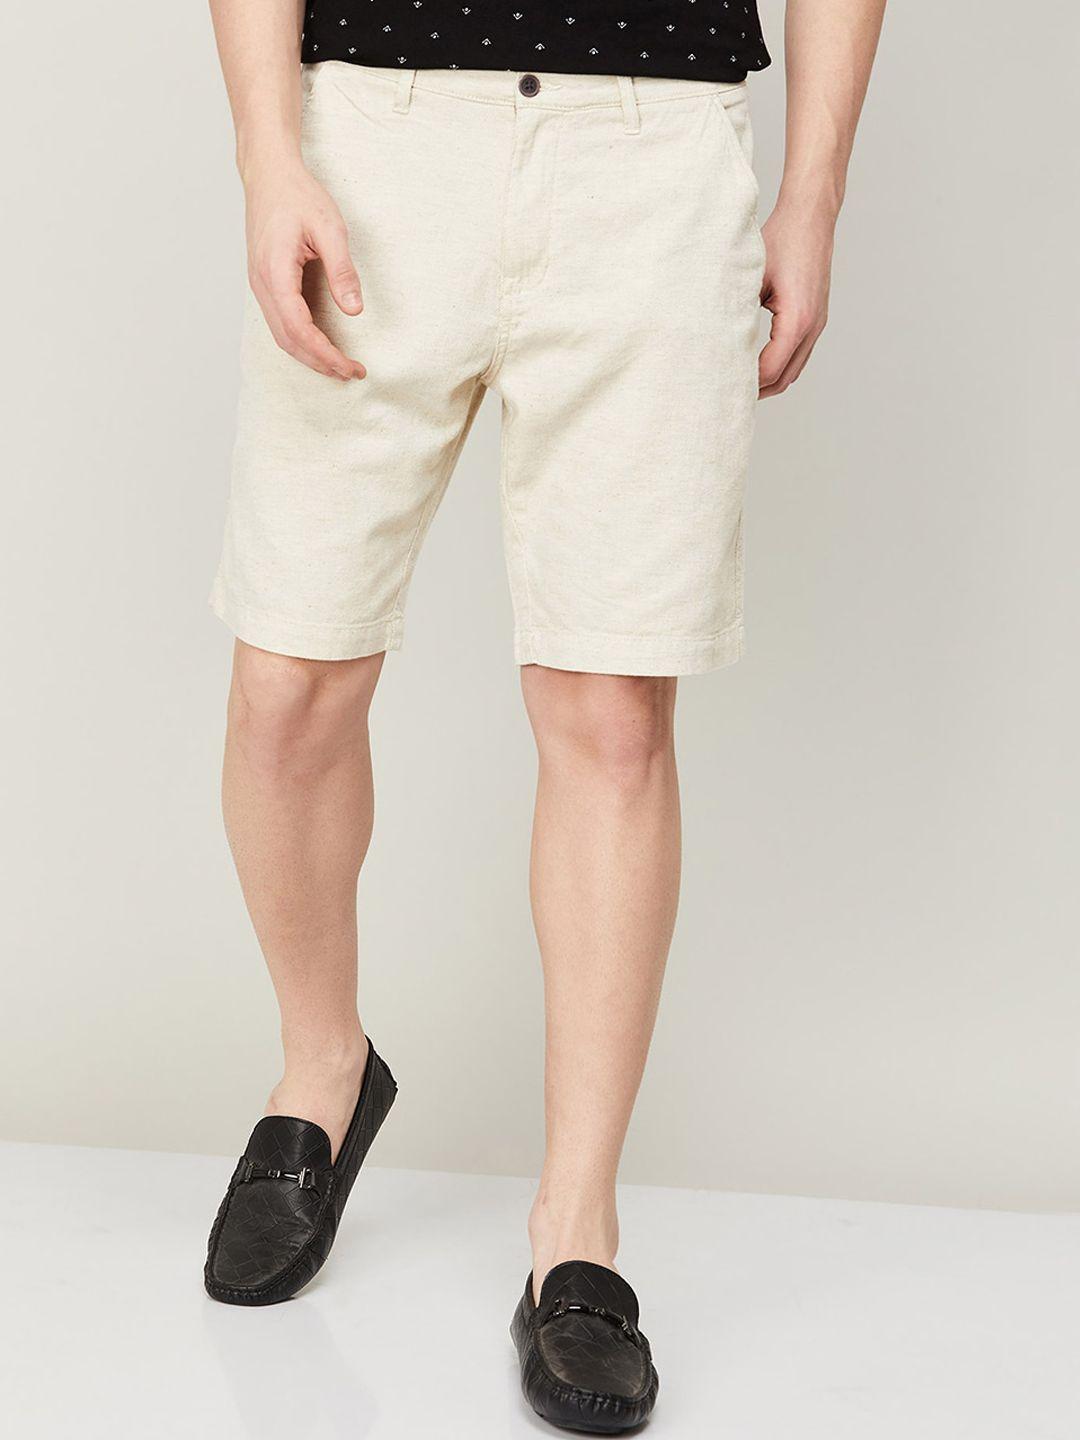 code by lifestyle men mid rise regular fit shorts